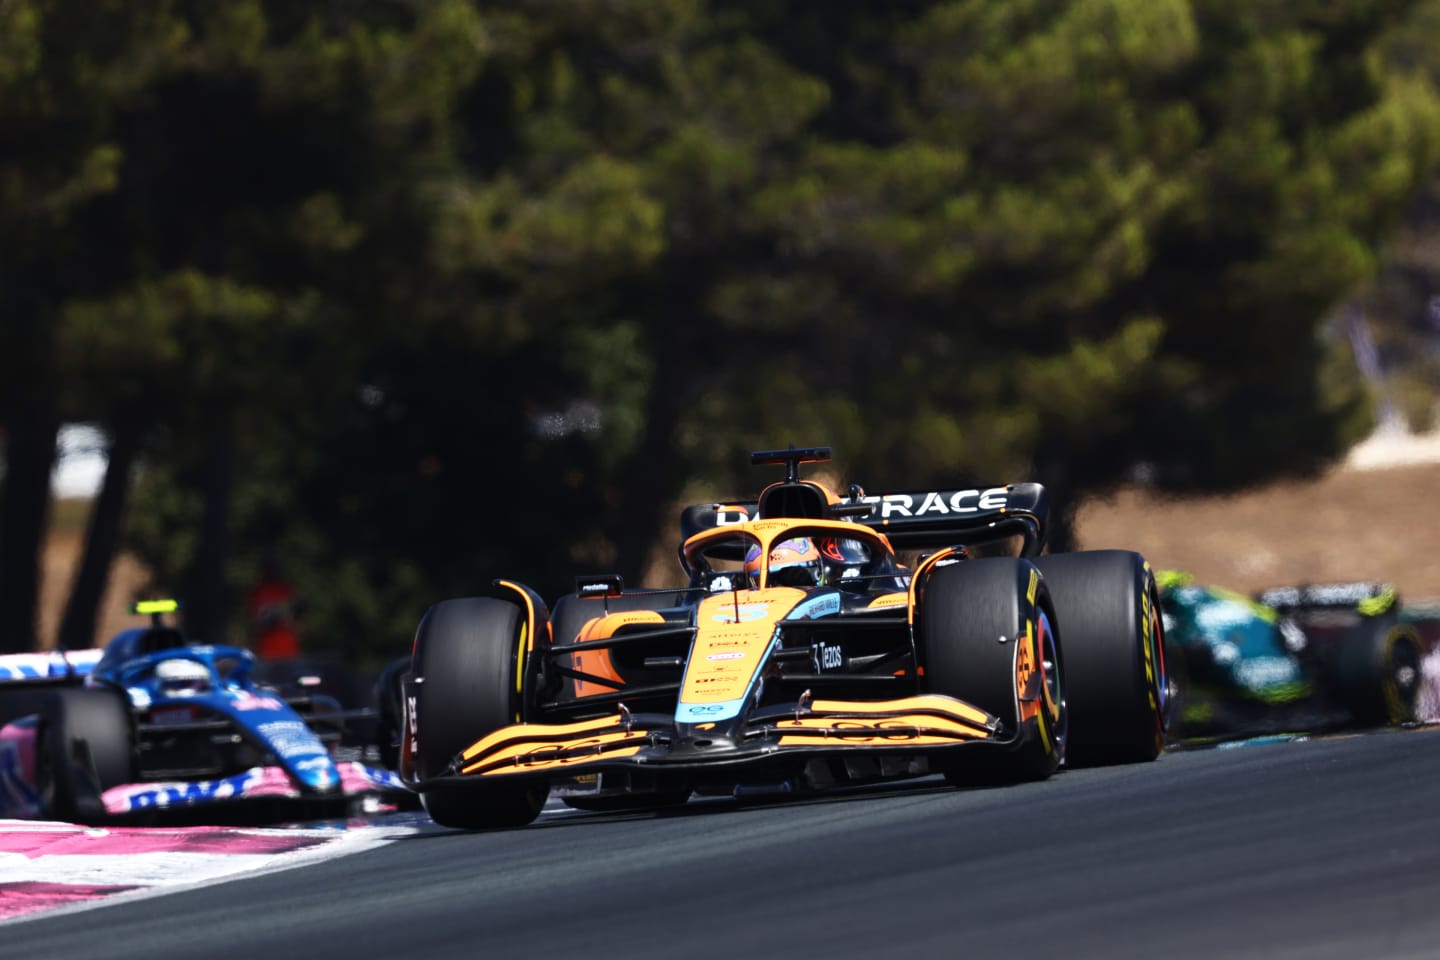 LE CASTELLET, FRANCE - JULY 24: Daniel Ricciardo of Australia driving the (3) McLaren MCL36 Mercedes leads Esteban Ocon of France driving the (31) Alpine F1 A522 Renault on track during the F1 Grand Prix of France at Circuit Paul Ricard on July 24, 2022 in Le Castellet, France. (Photo by Clive Rose/Getty Images)